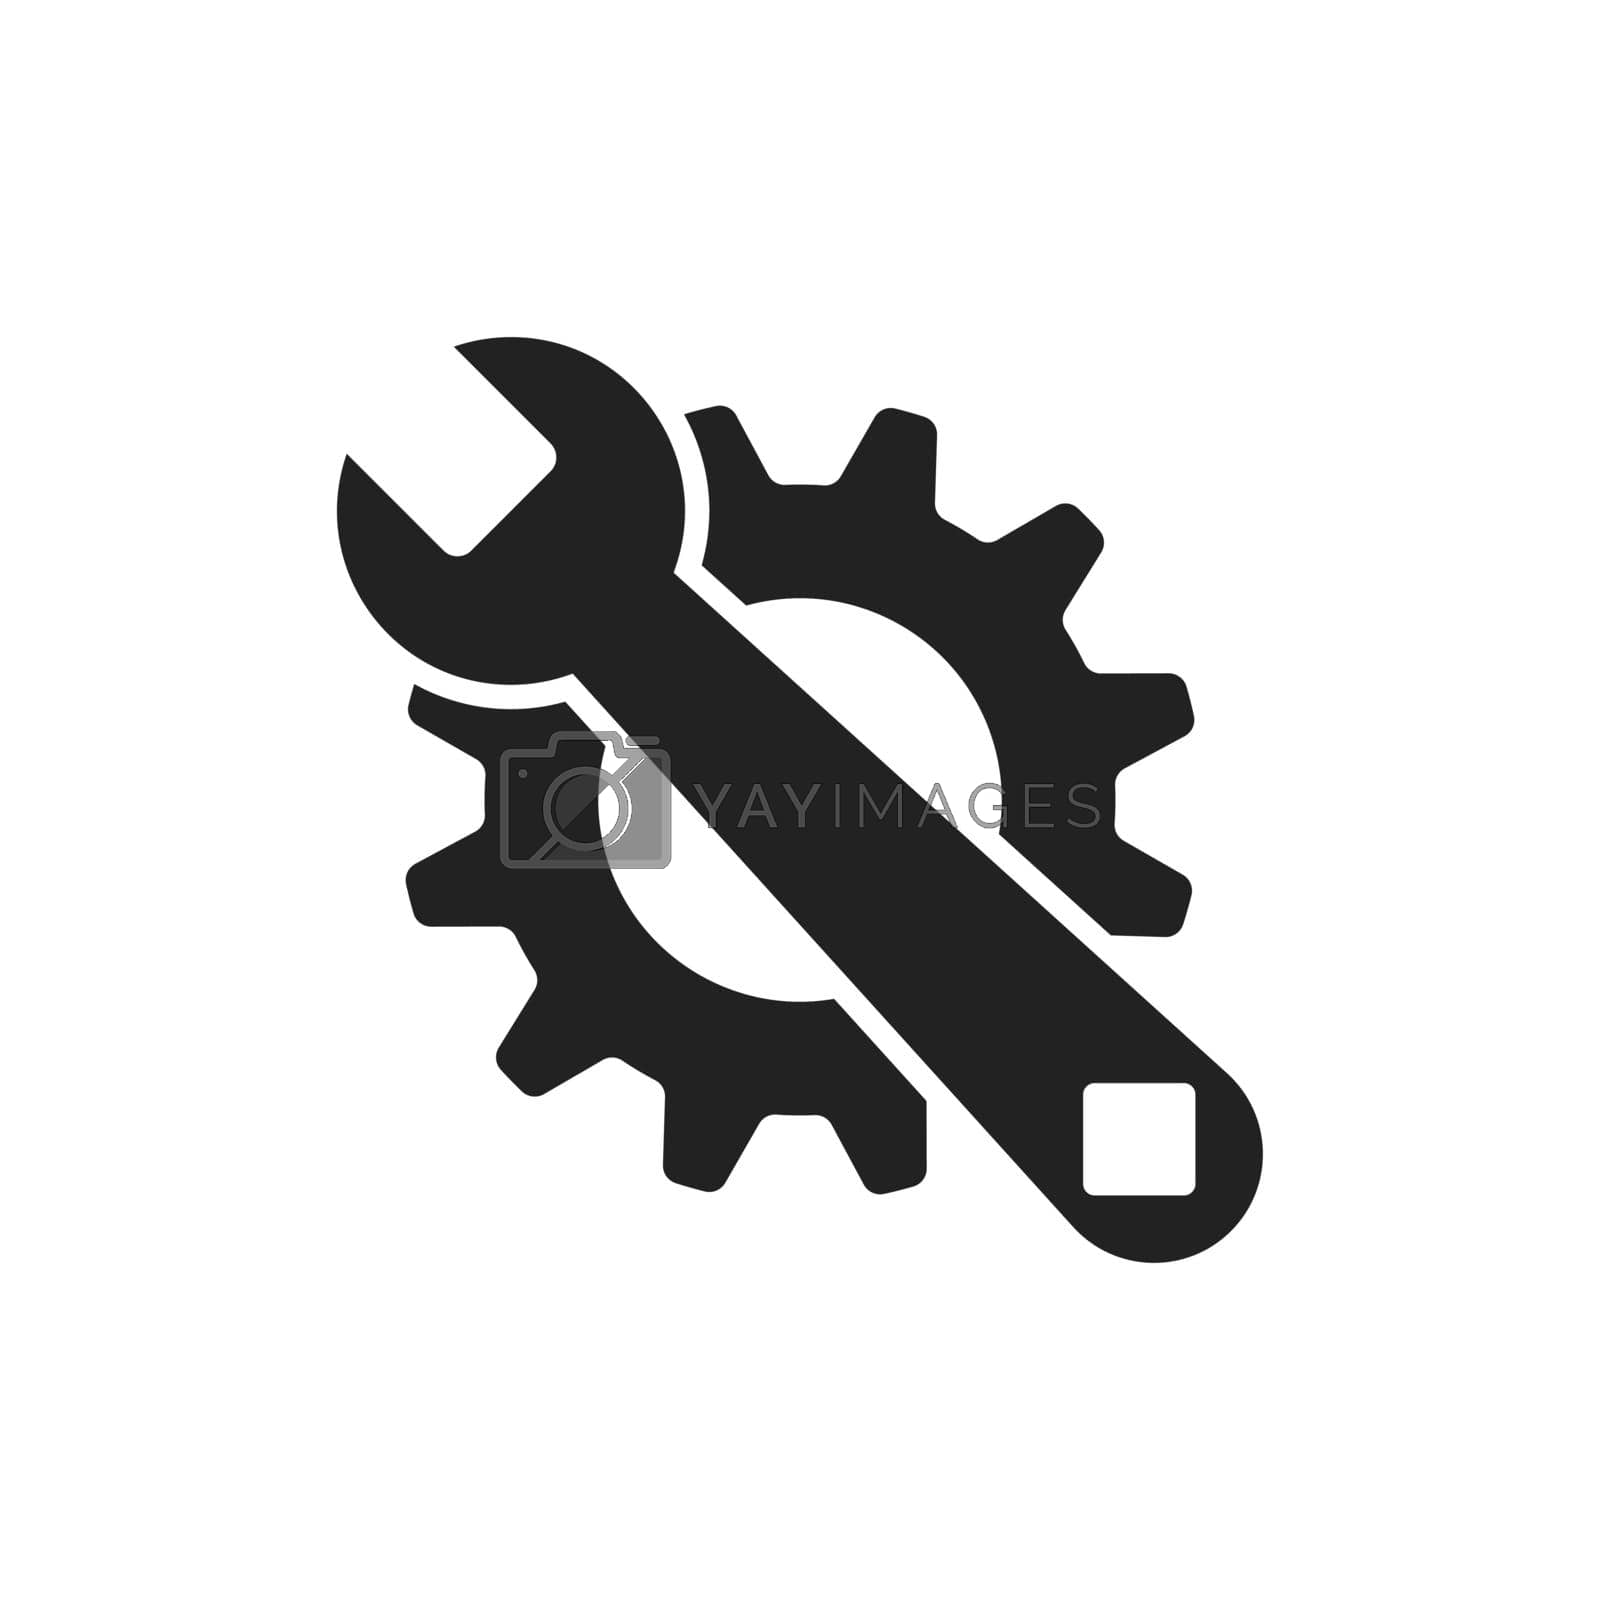 Royalty free image of Service tools flat vector icon. Cogwheel with wrench symbol logo illustration. by LysenkoA